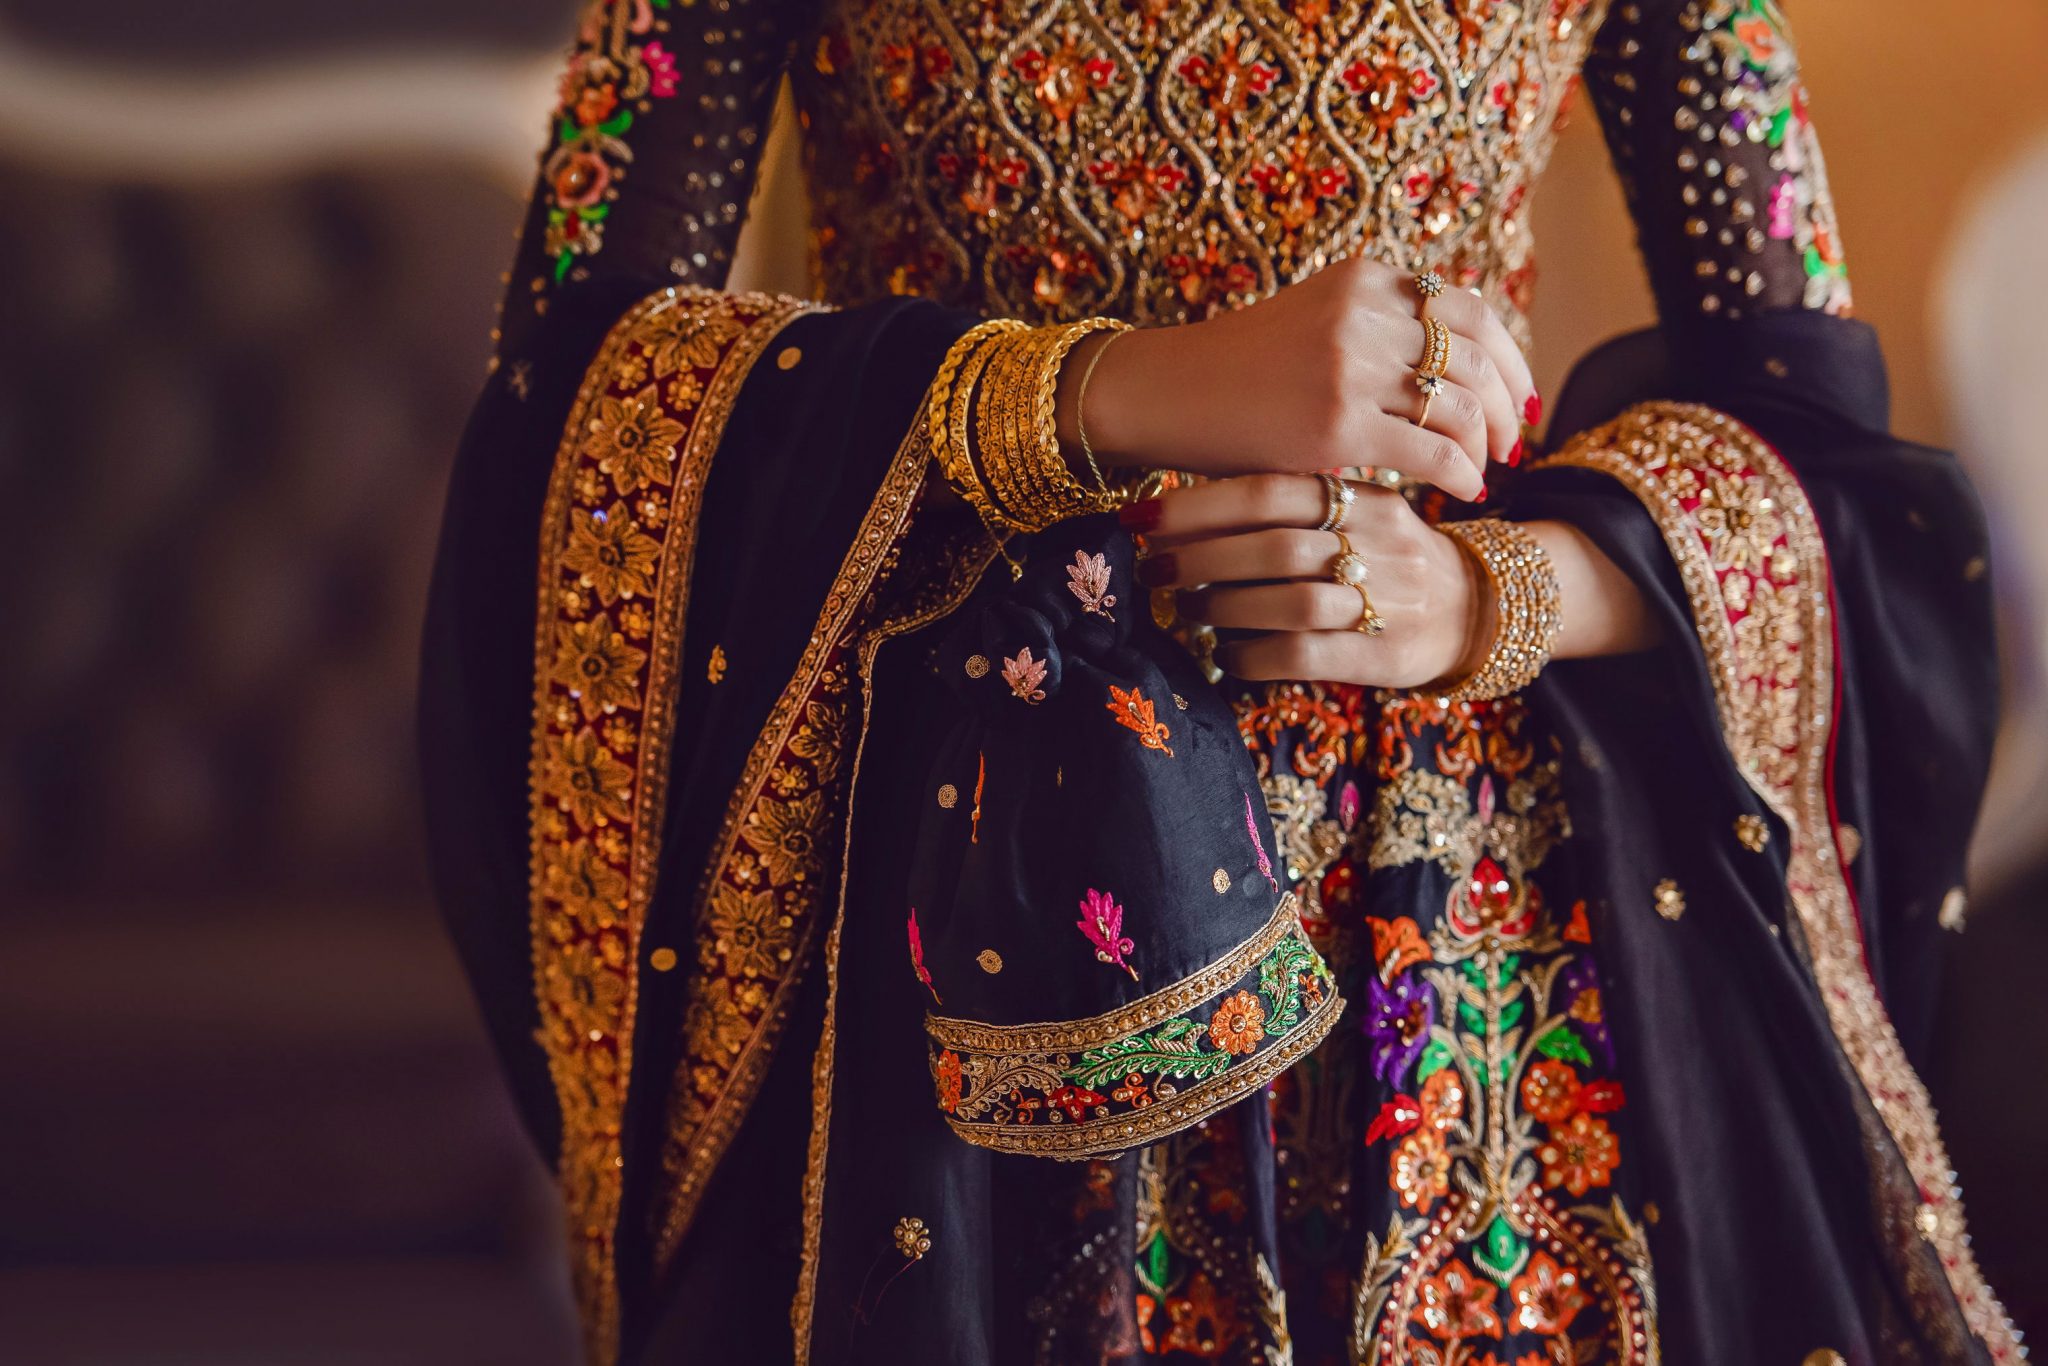 A bride's beautiful wedding outfit with all the gold accessories